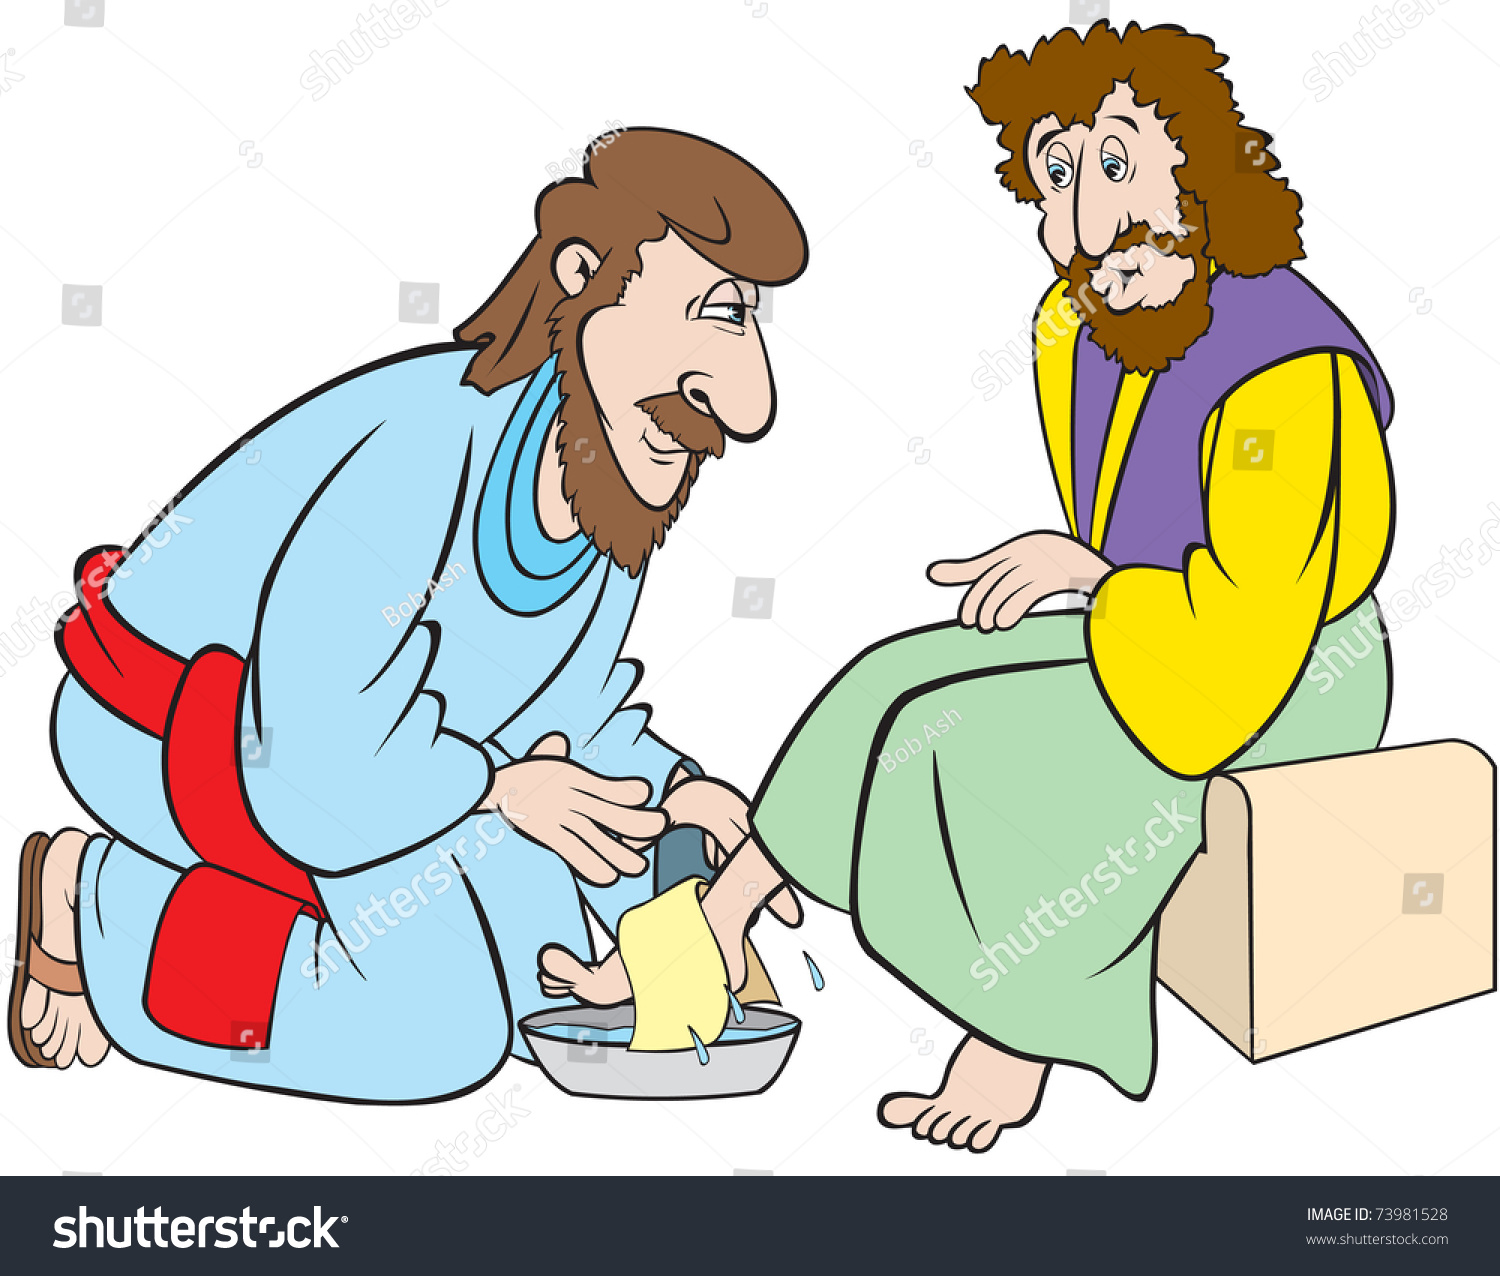 clipart jesus and his disciples - photo #49